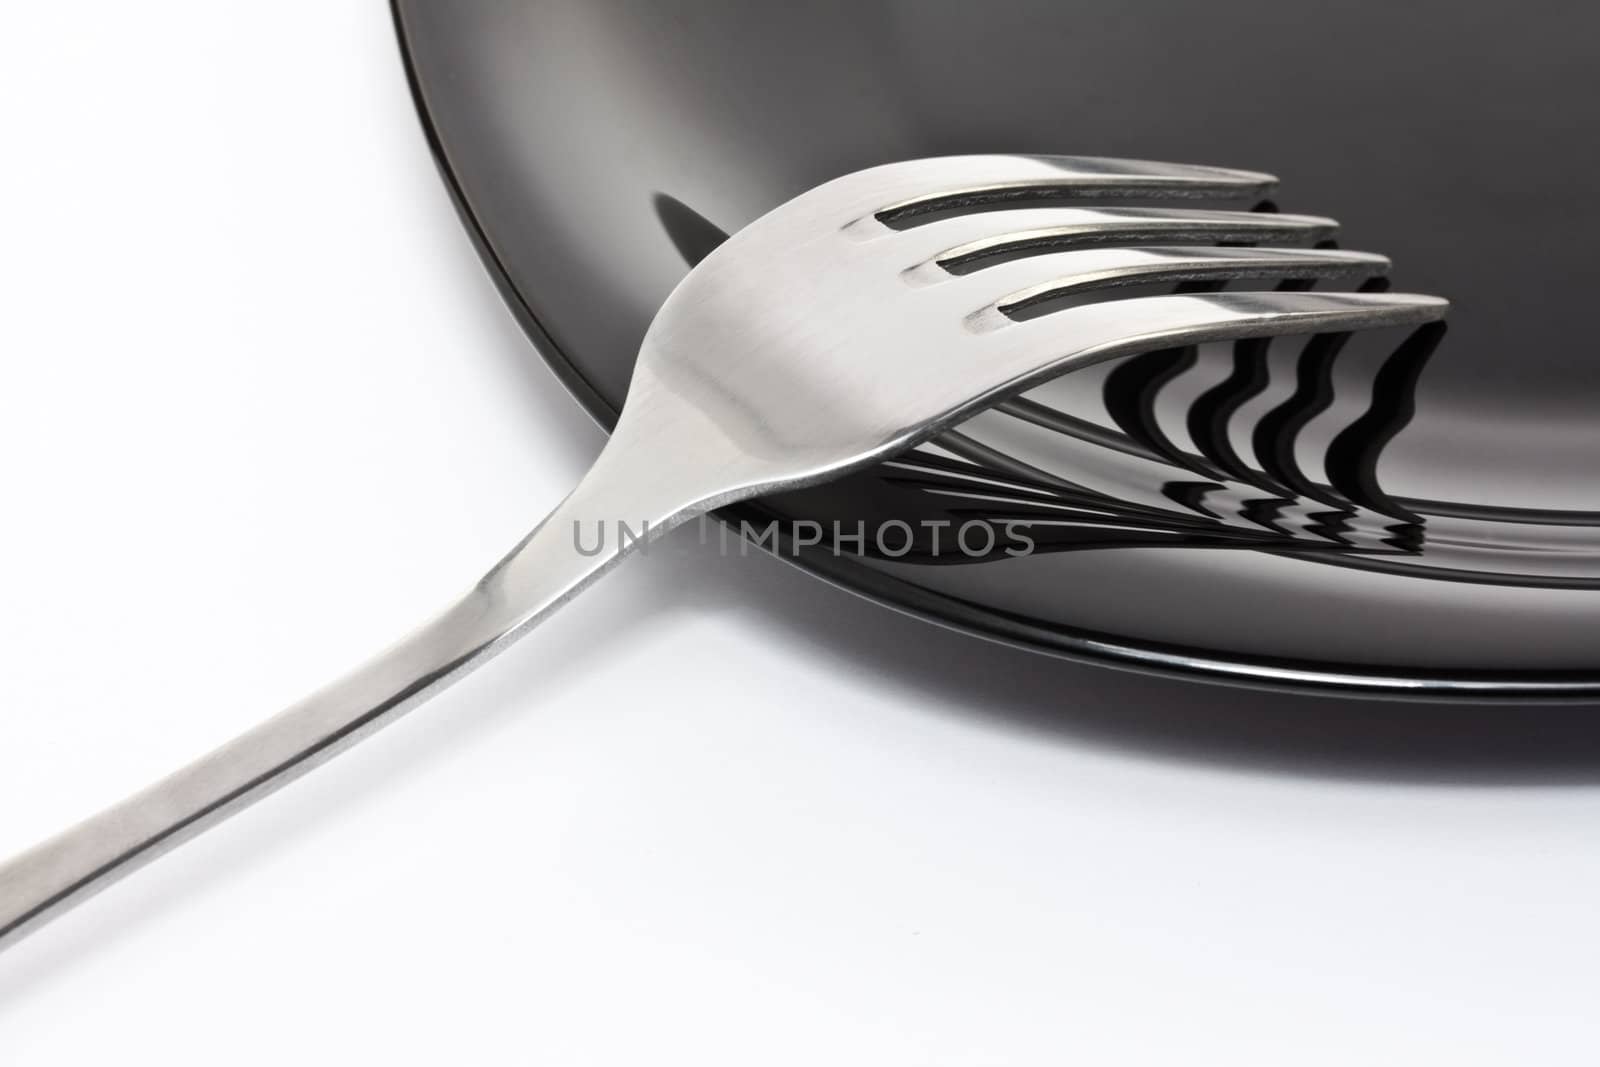 Black high-gloss plate with stainless fork